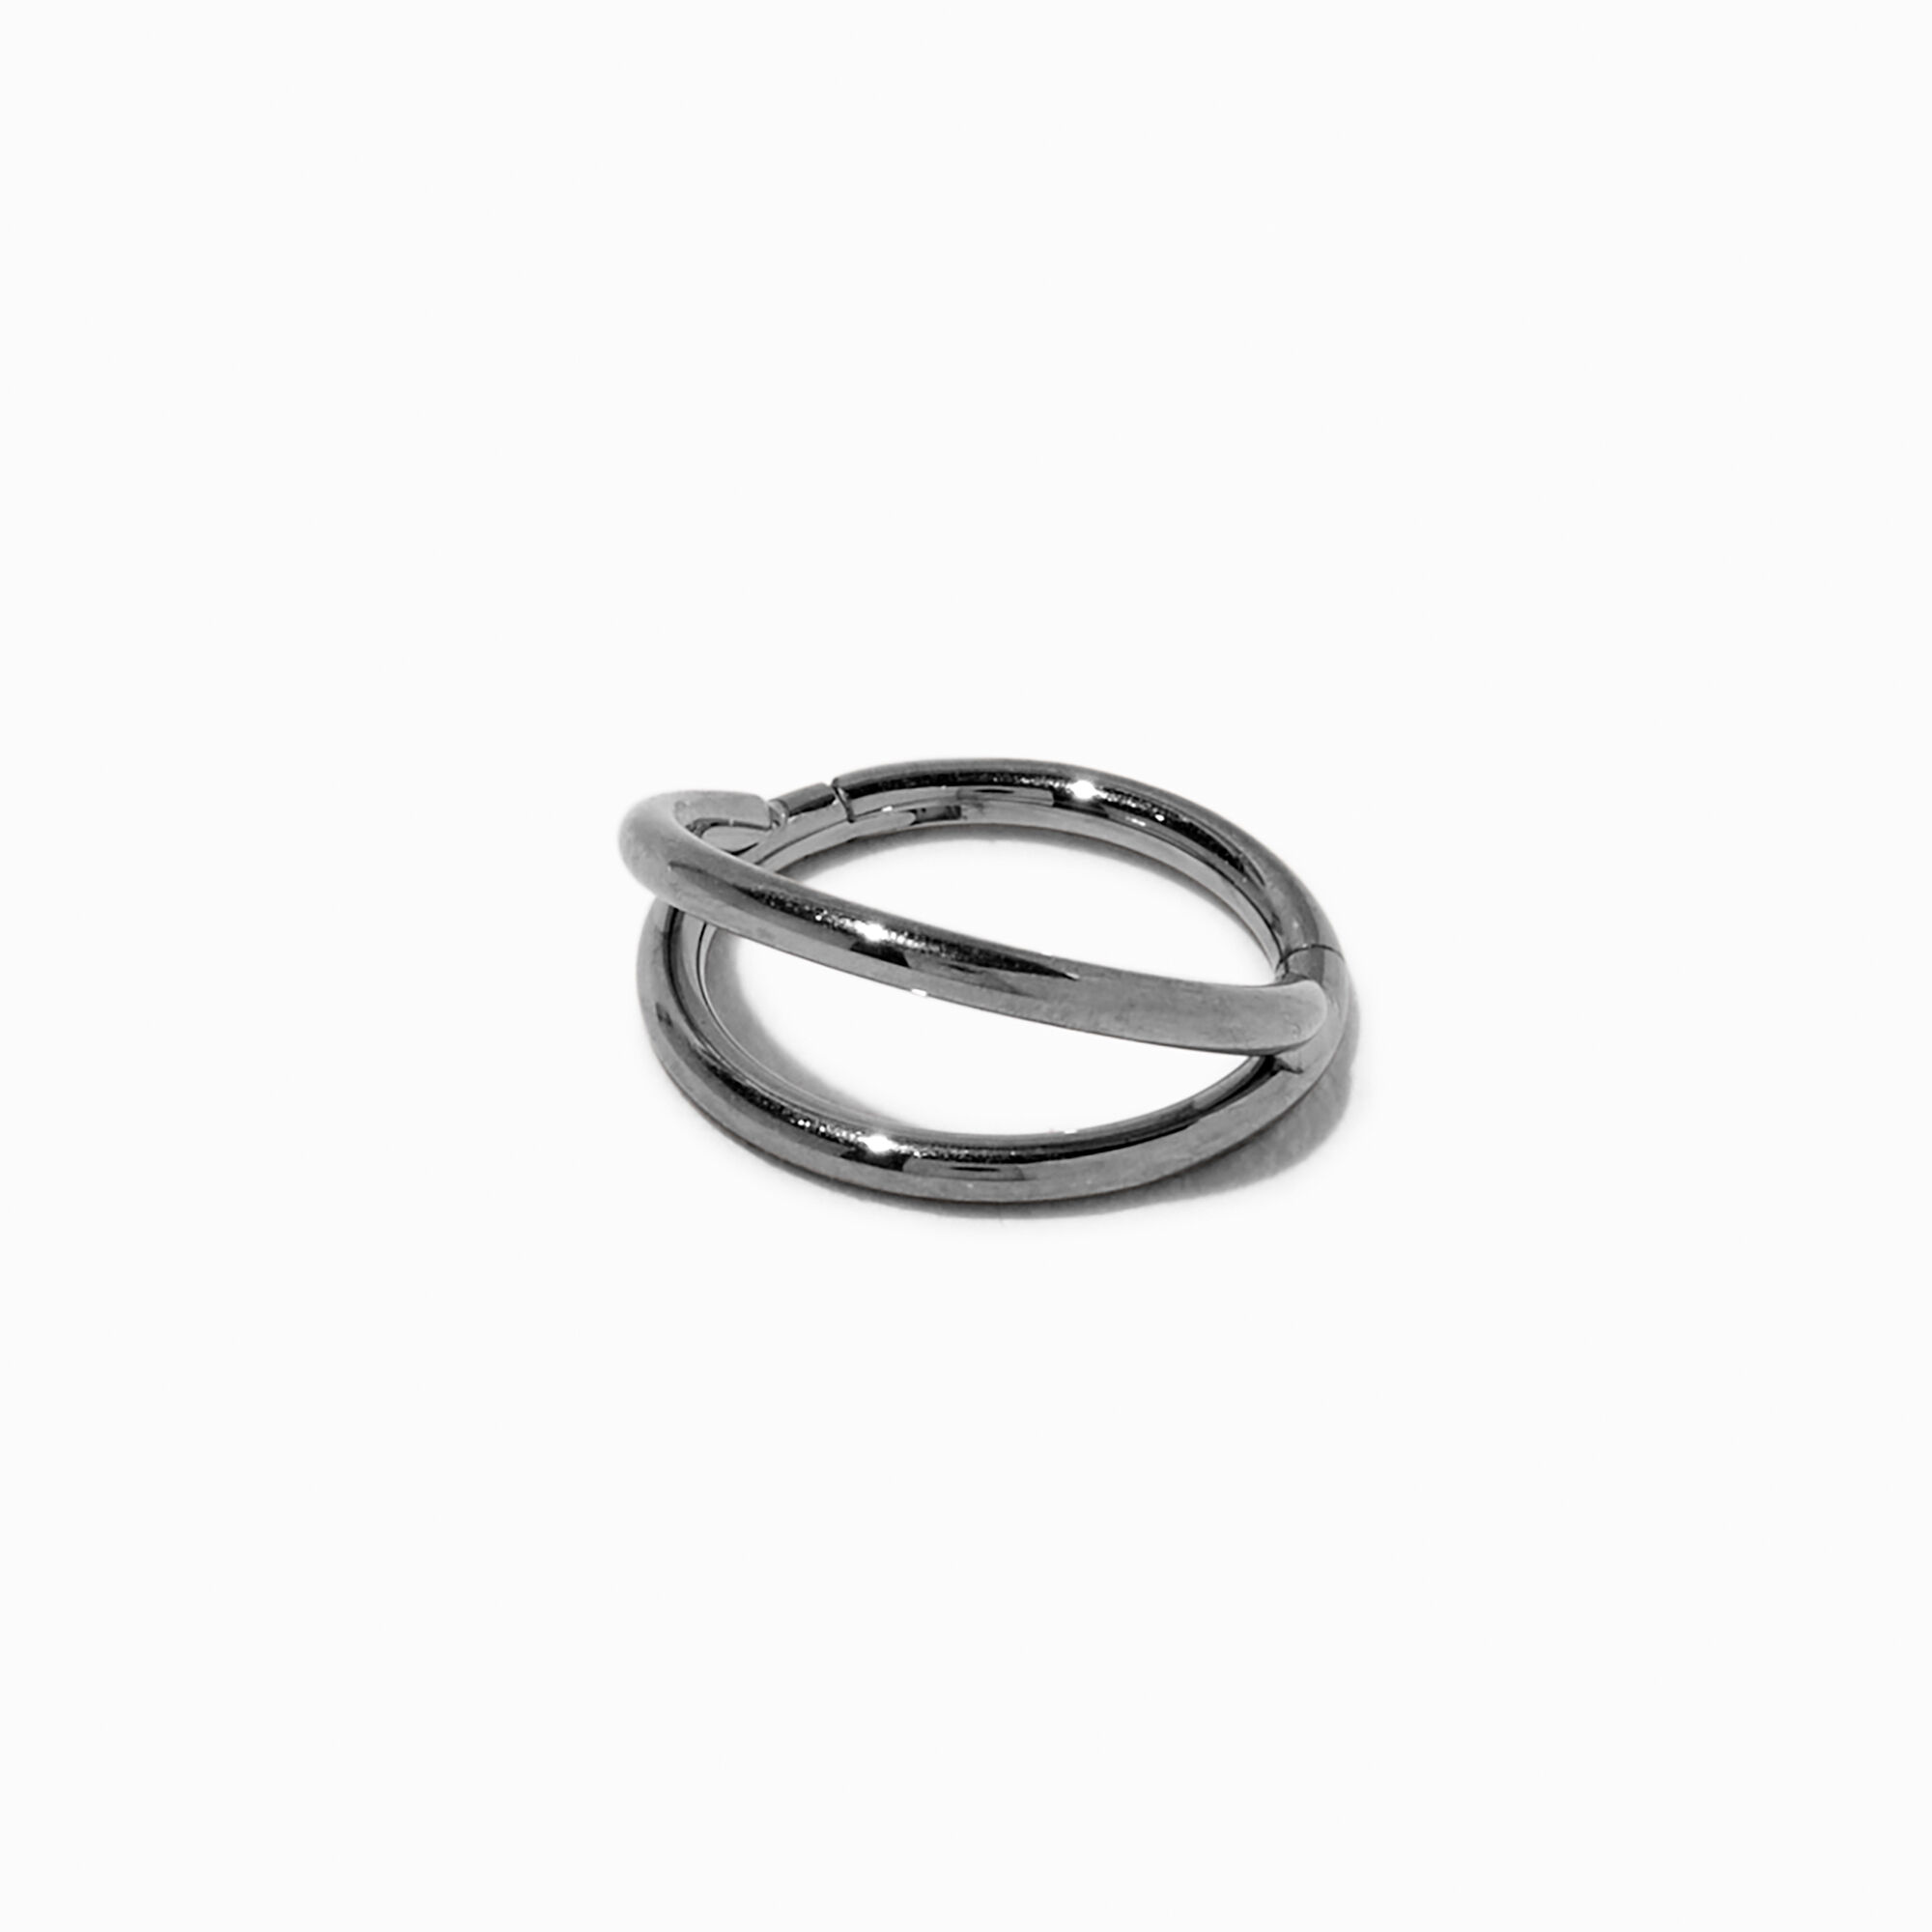 View Claires Tone 18G Double Row Titanium Nose Ring Silver information